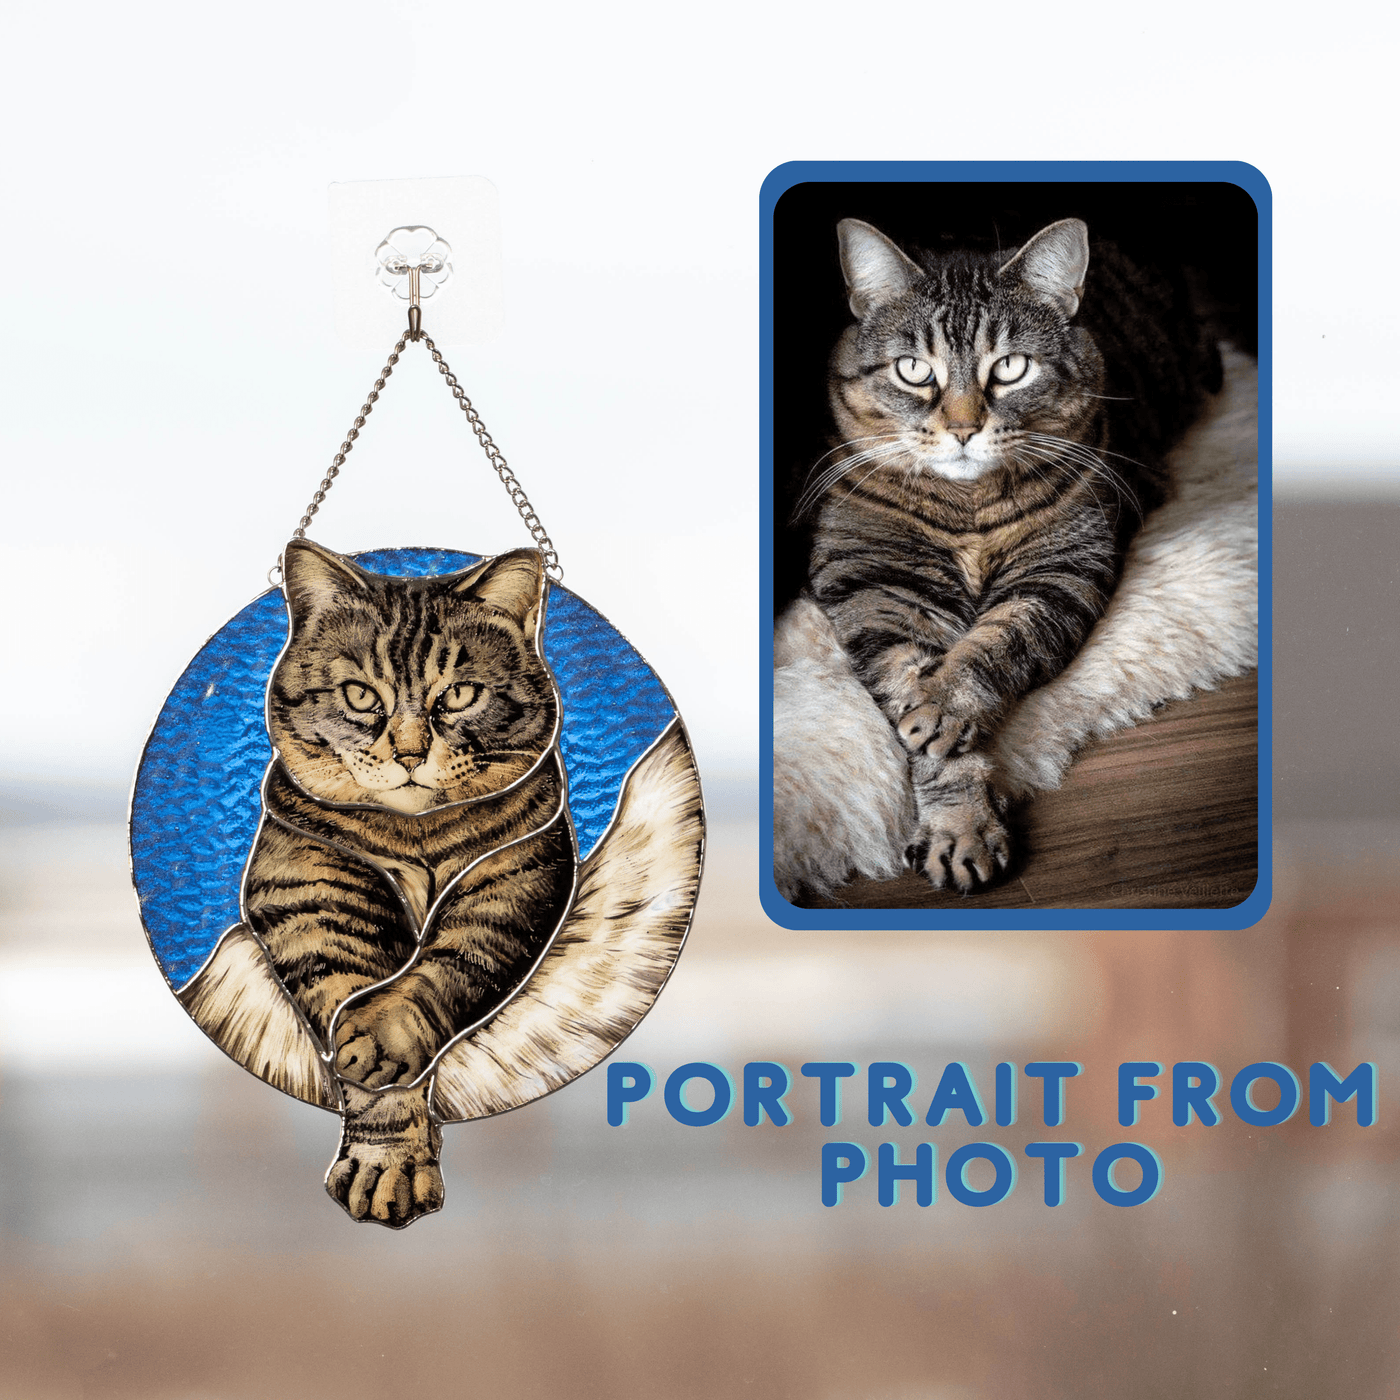 Round stained glass hand-painted portrait of a cat in comparison with the real pet photo